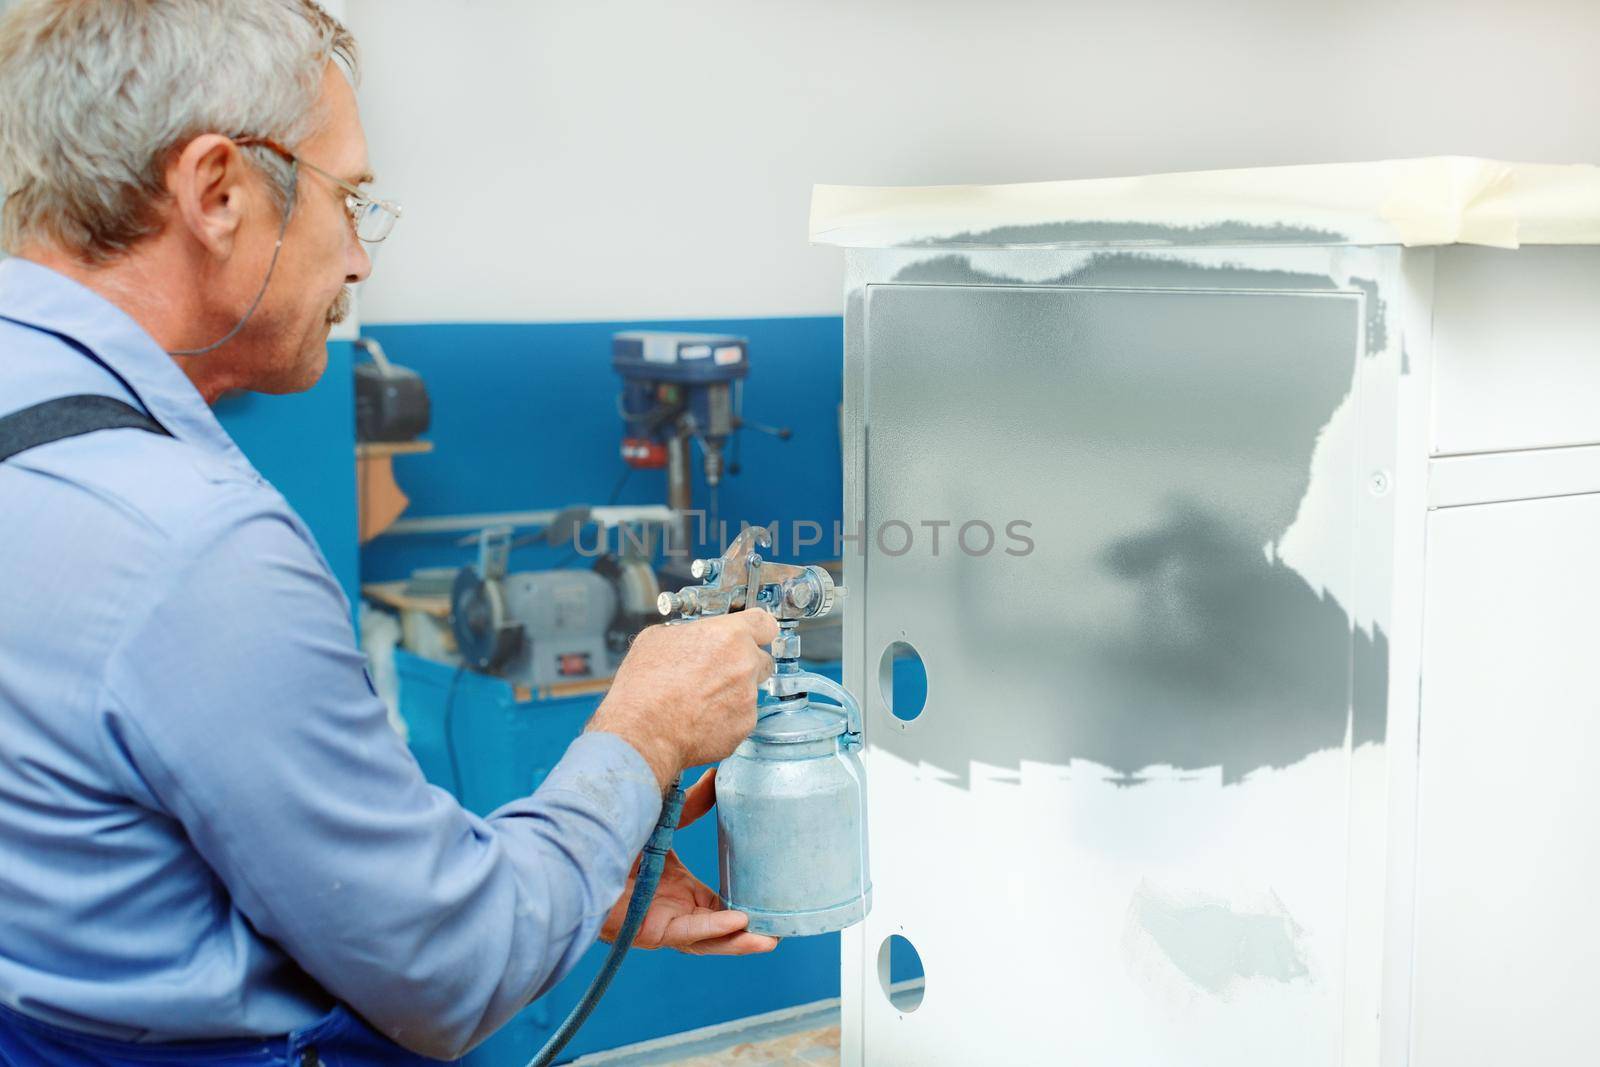 An employee paints metal products. An elderly man with glasses holds a compressor spray gun in his hand and paints a Cabinet in the workshop